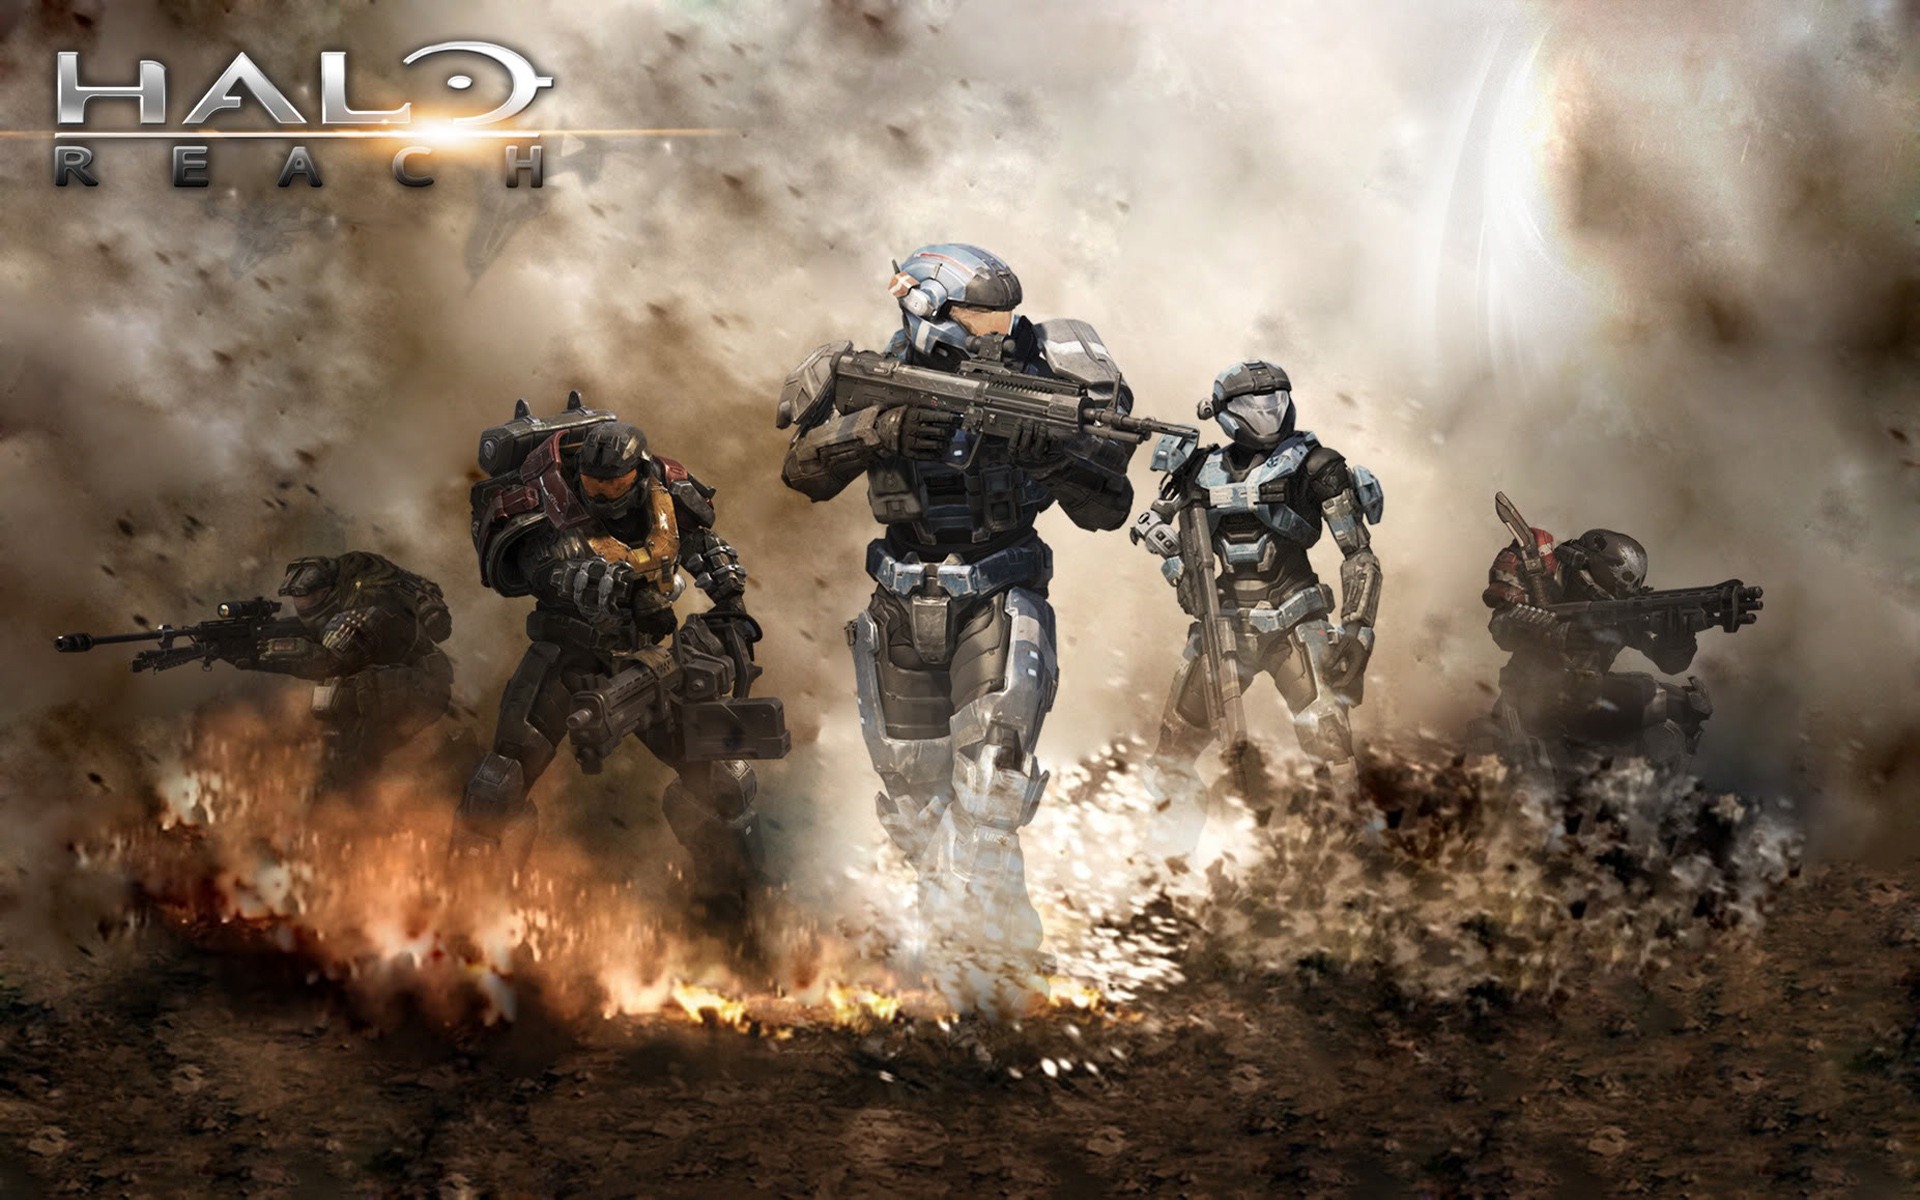 Halo game HD wallpapers #1 - 1920x1200